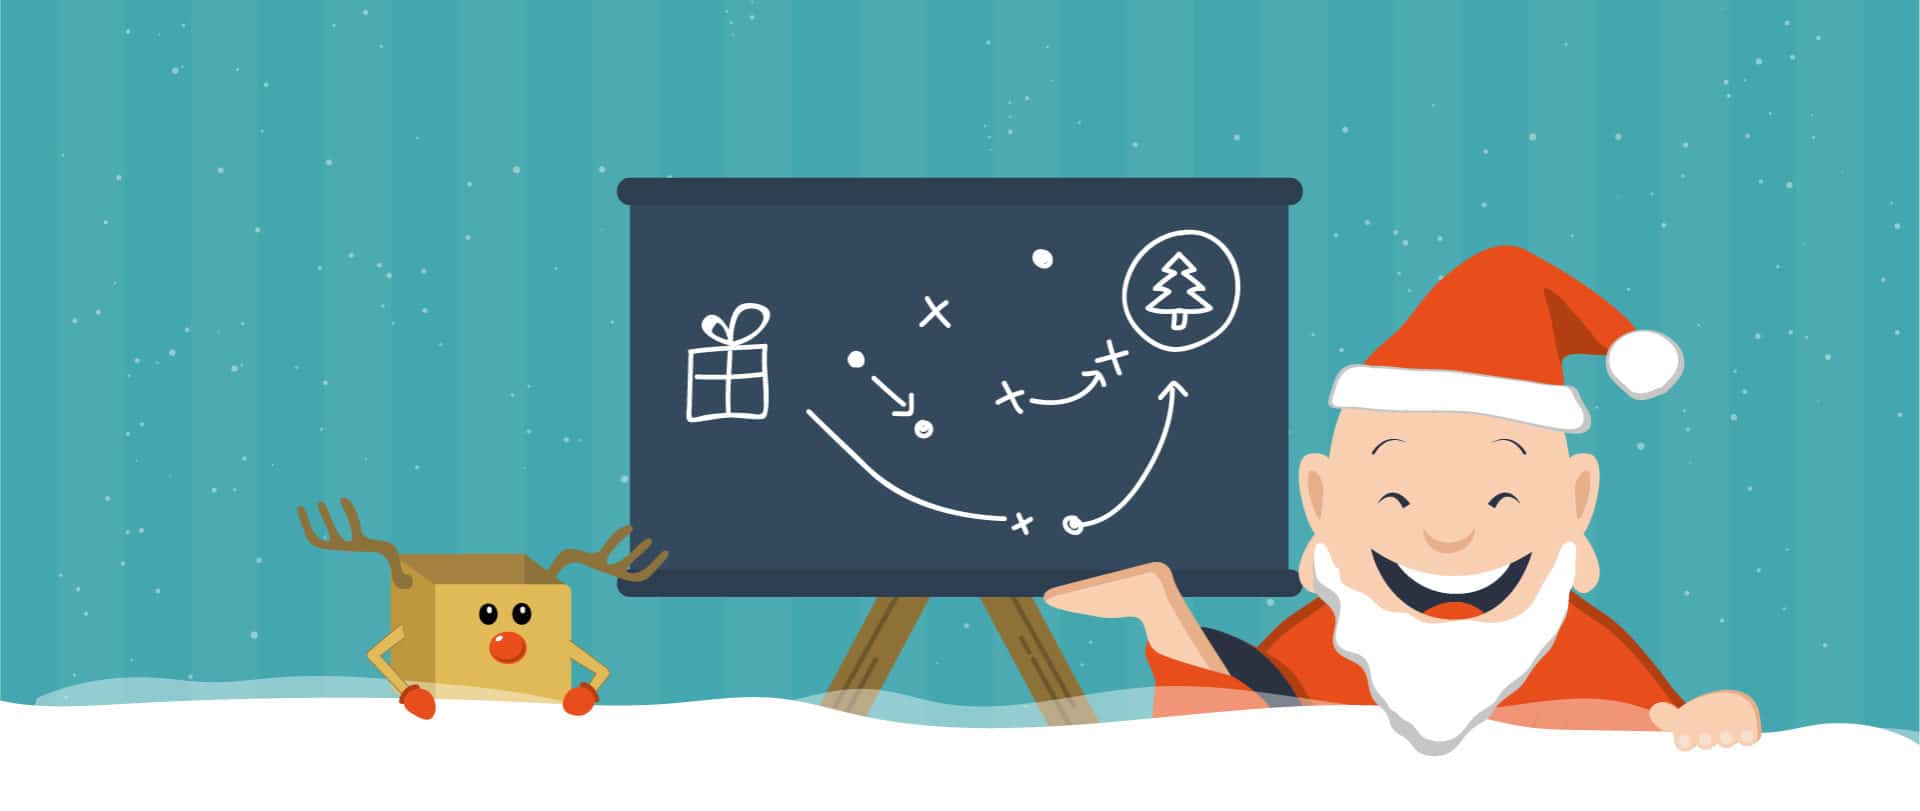 Santa and Bill the Reindeer Box draw a tutorial for holiday express shipping on a blackboard.